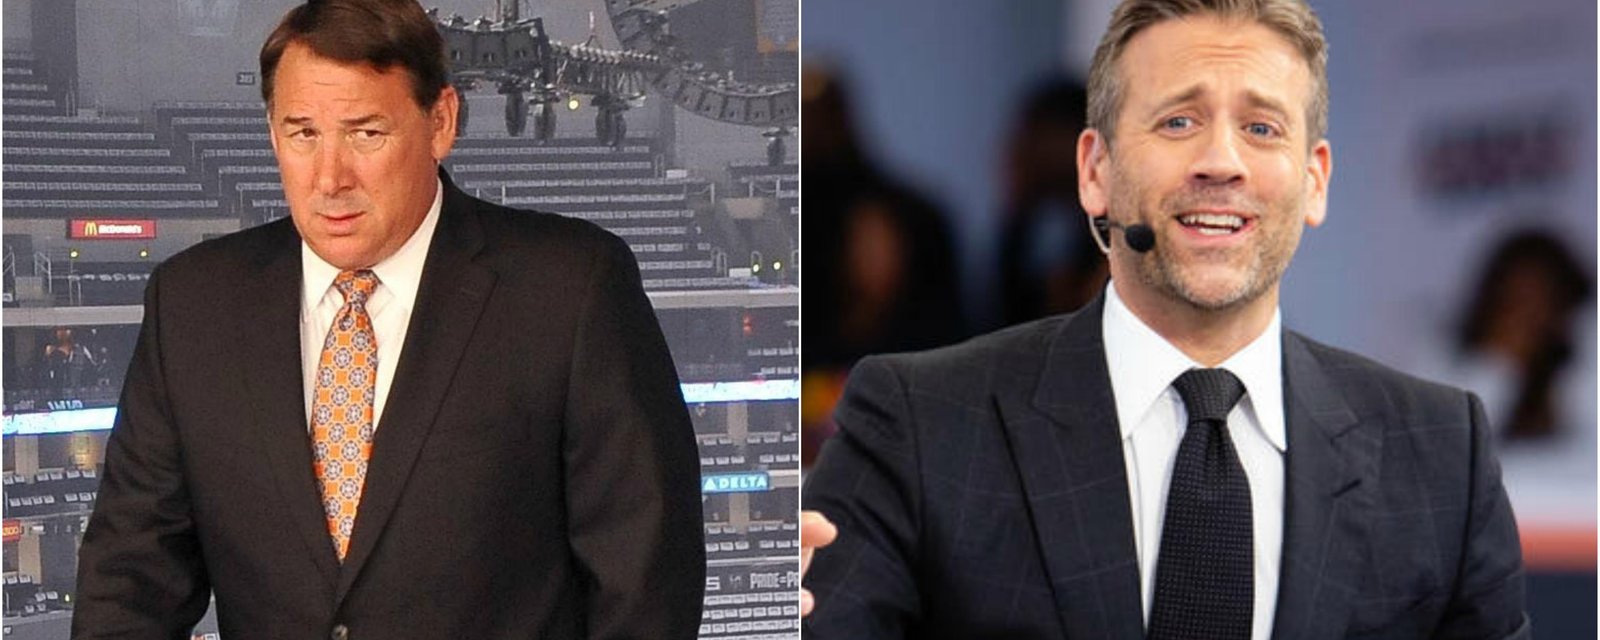 Max Kellerman roasted by Mike Milbury after claiming “no one really cares about hockey.”